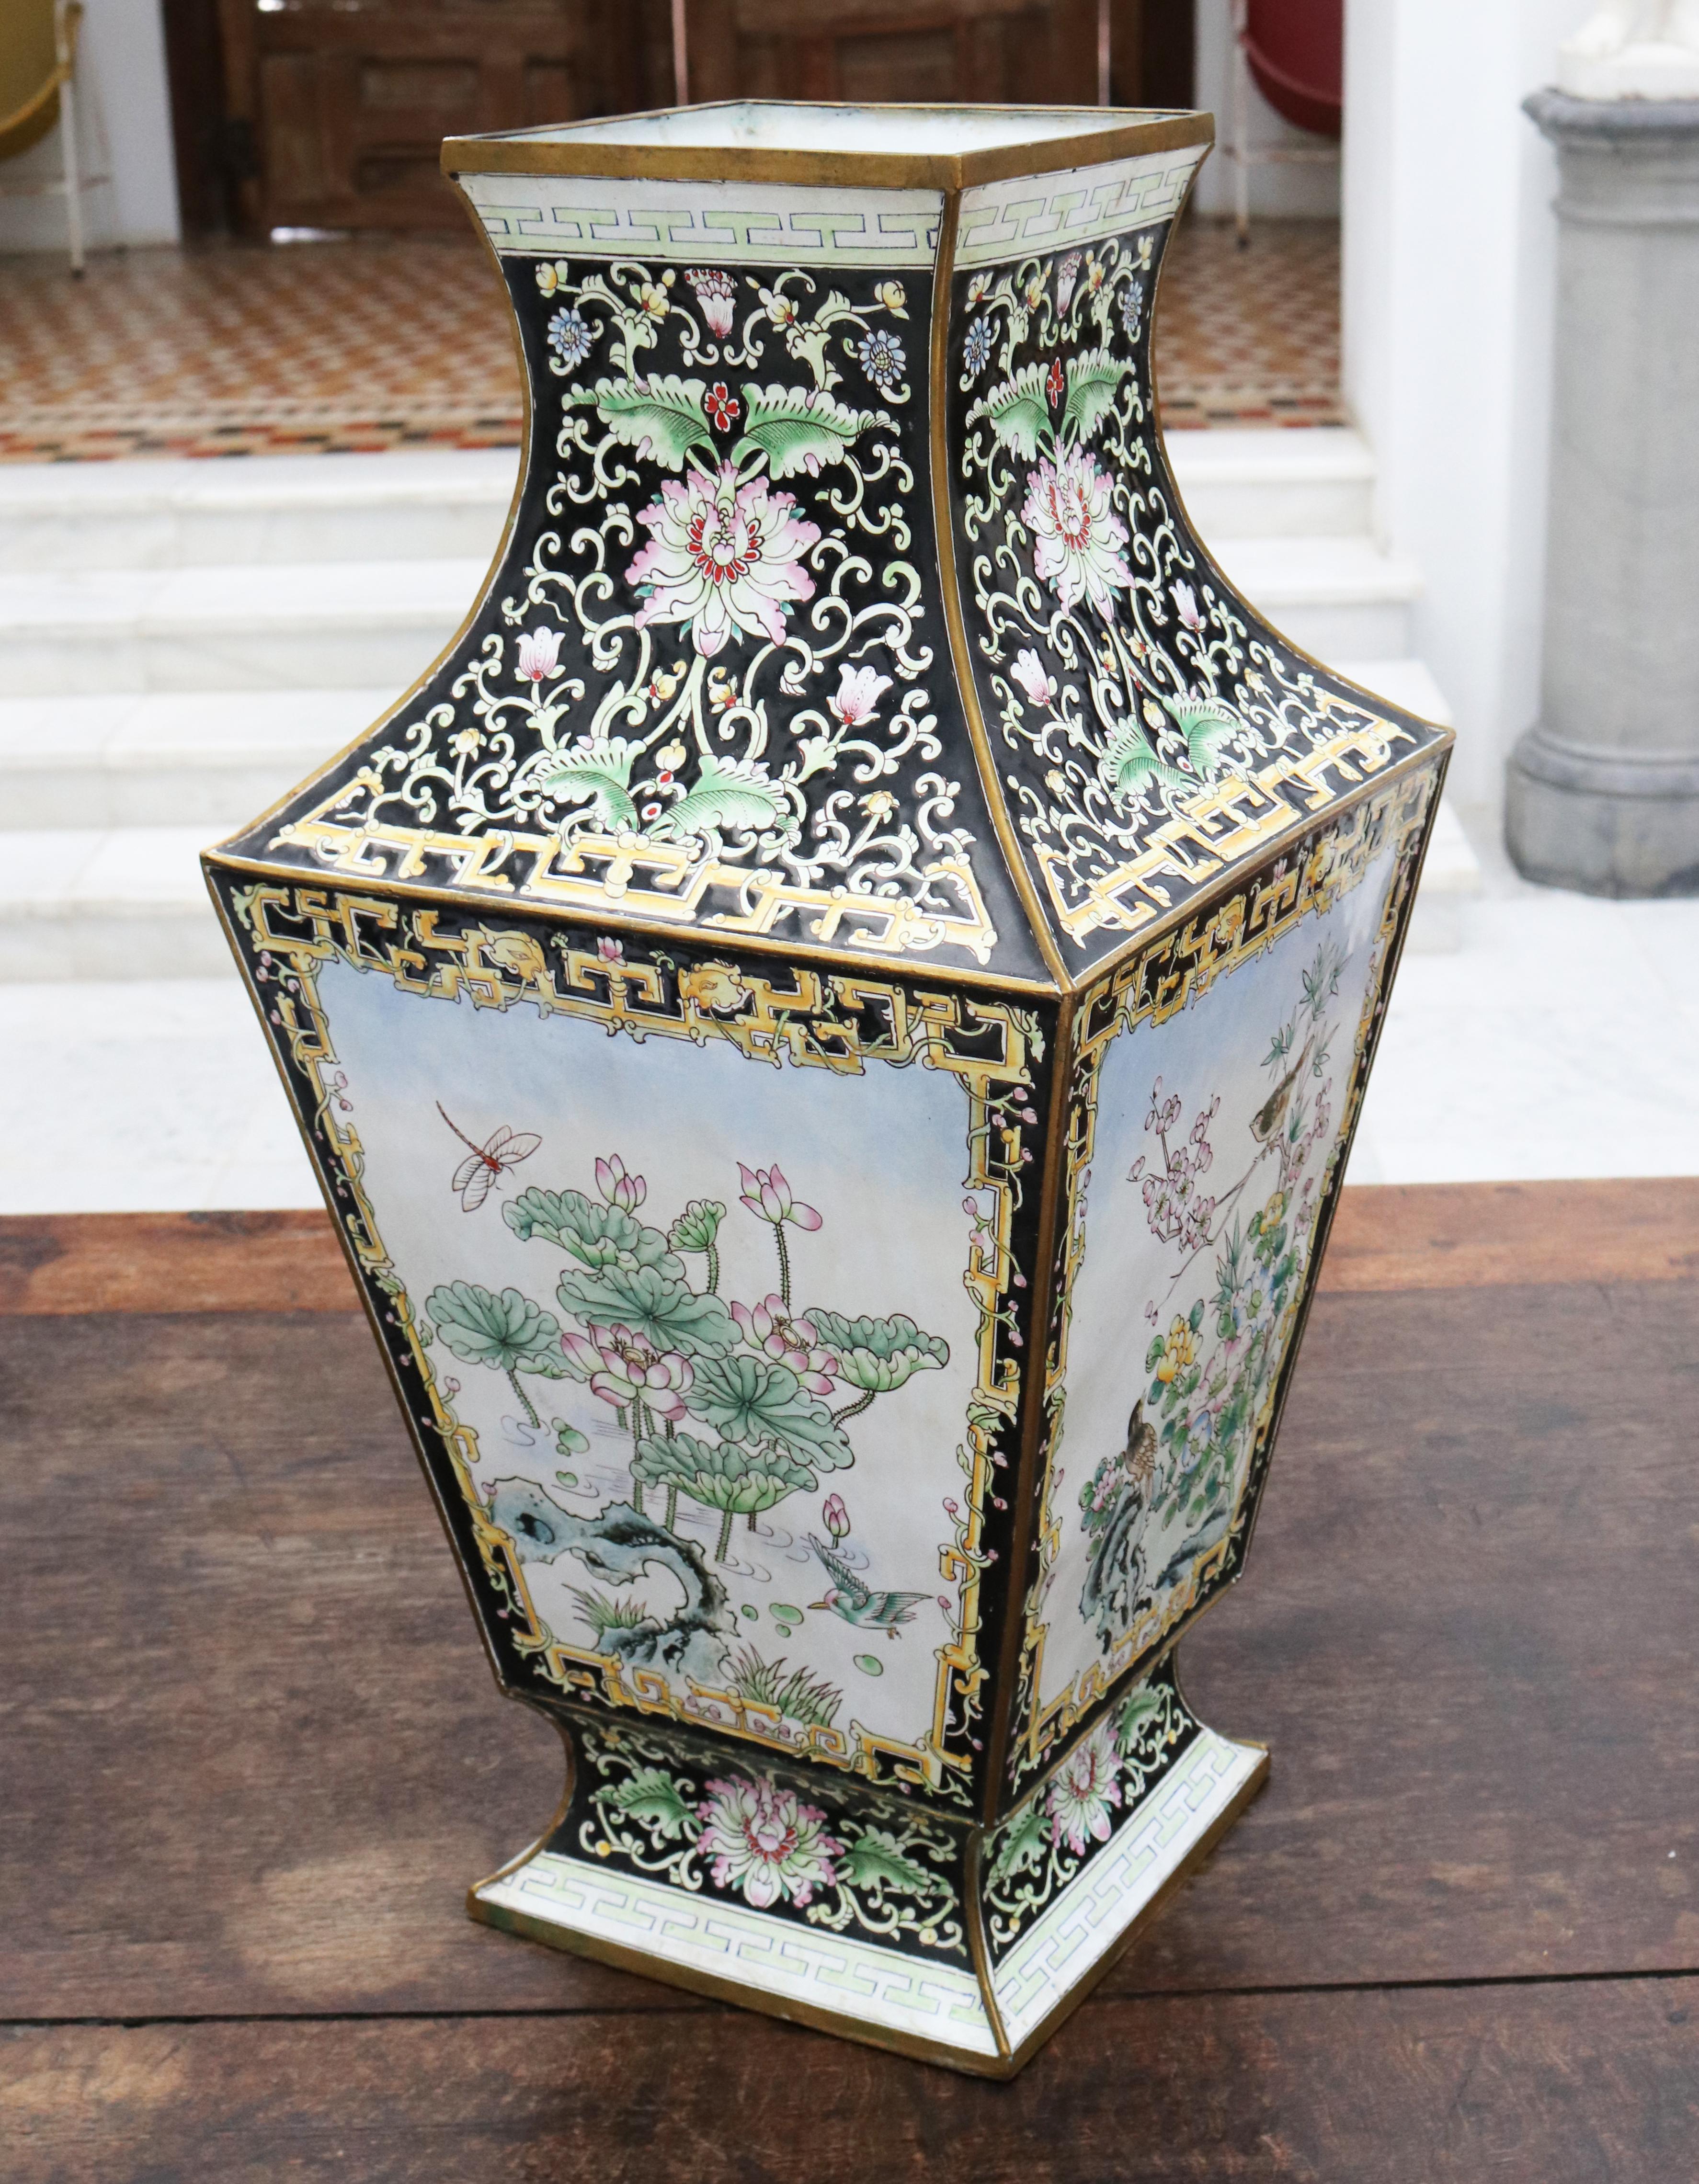 1970s Chinese Cloisonné hand painted vase with flower motifs

Base dimension: 18 x 18 cm.